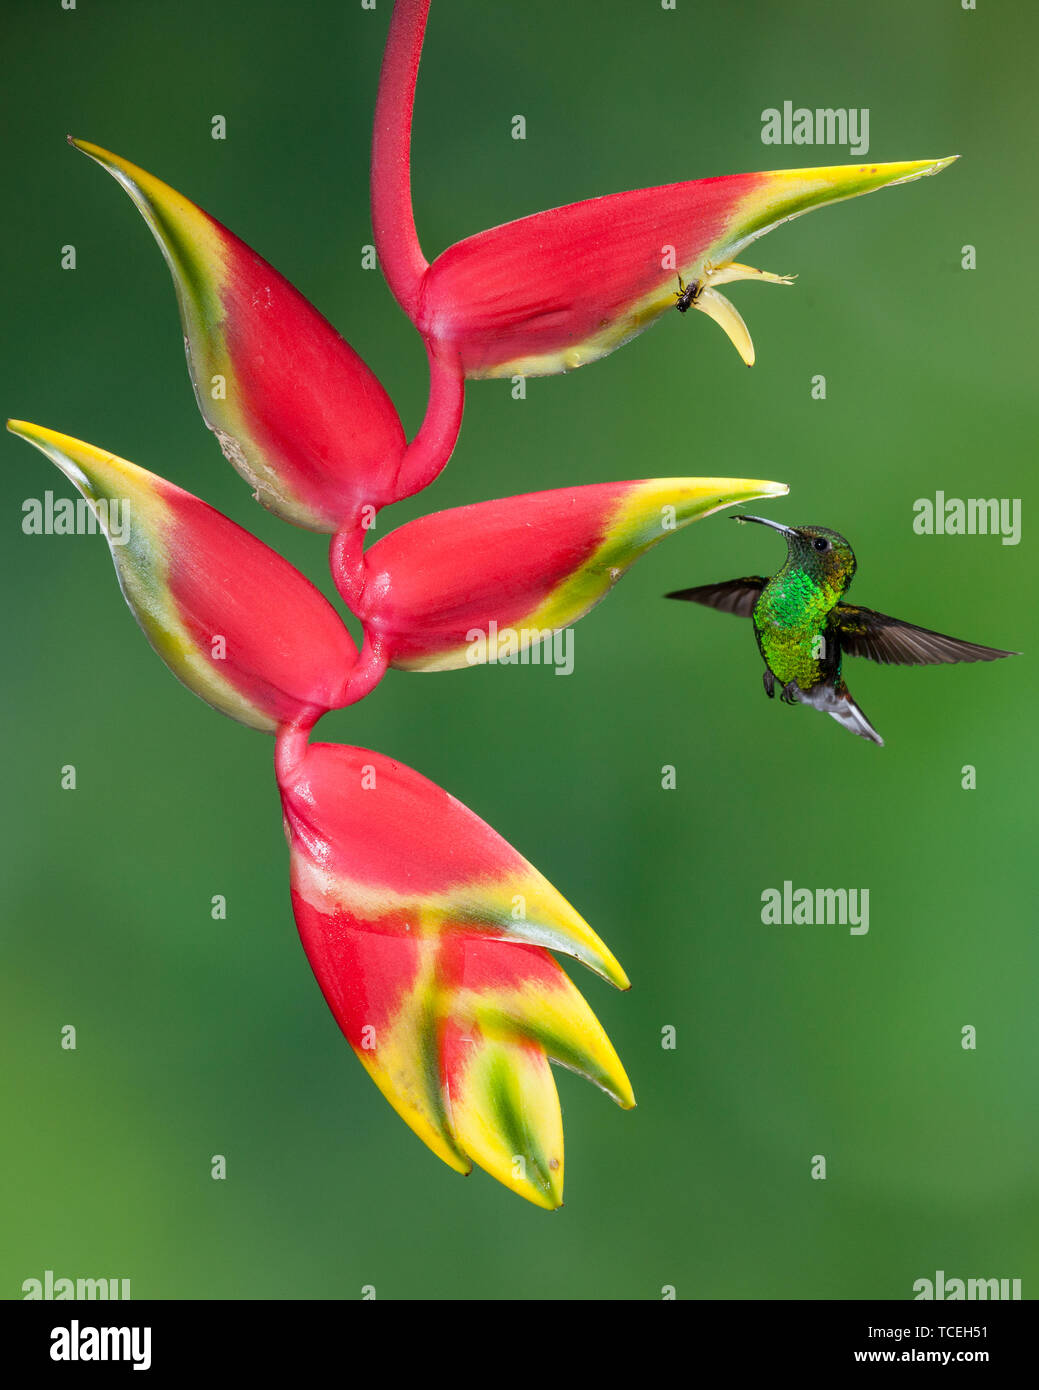 A Coppery-headed Emerald  Hummingbird approaches a tropical Lobster Claw Heliconia flower, Heliconia rostrata, in Costa Rica.  The bird is also pollin Stock Photo